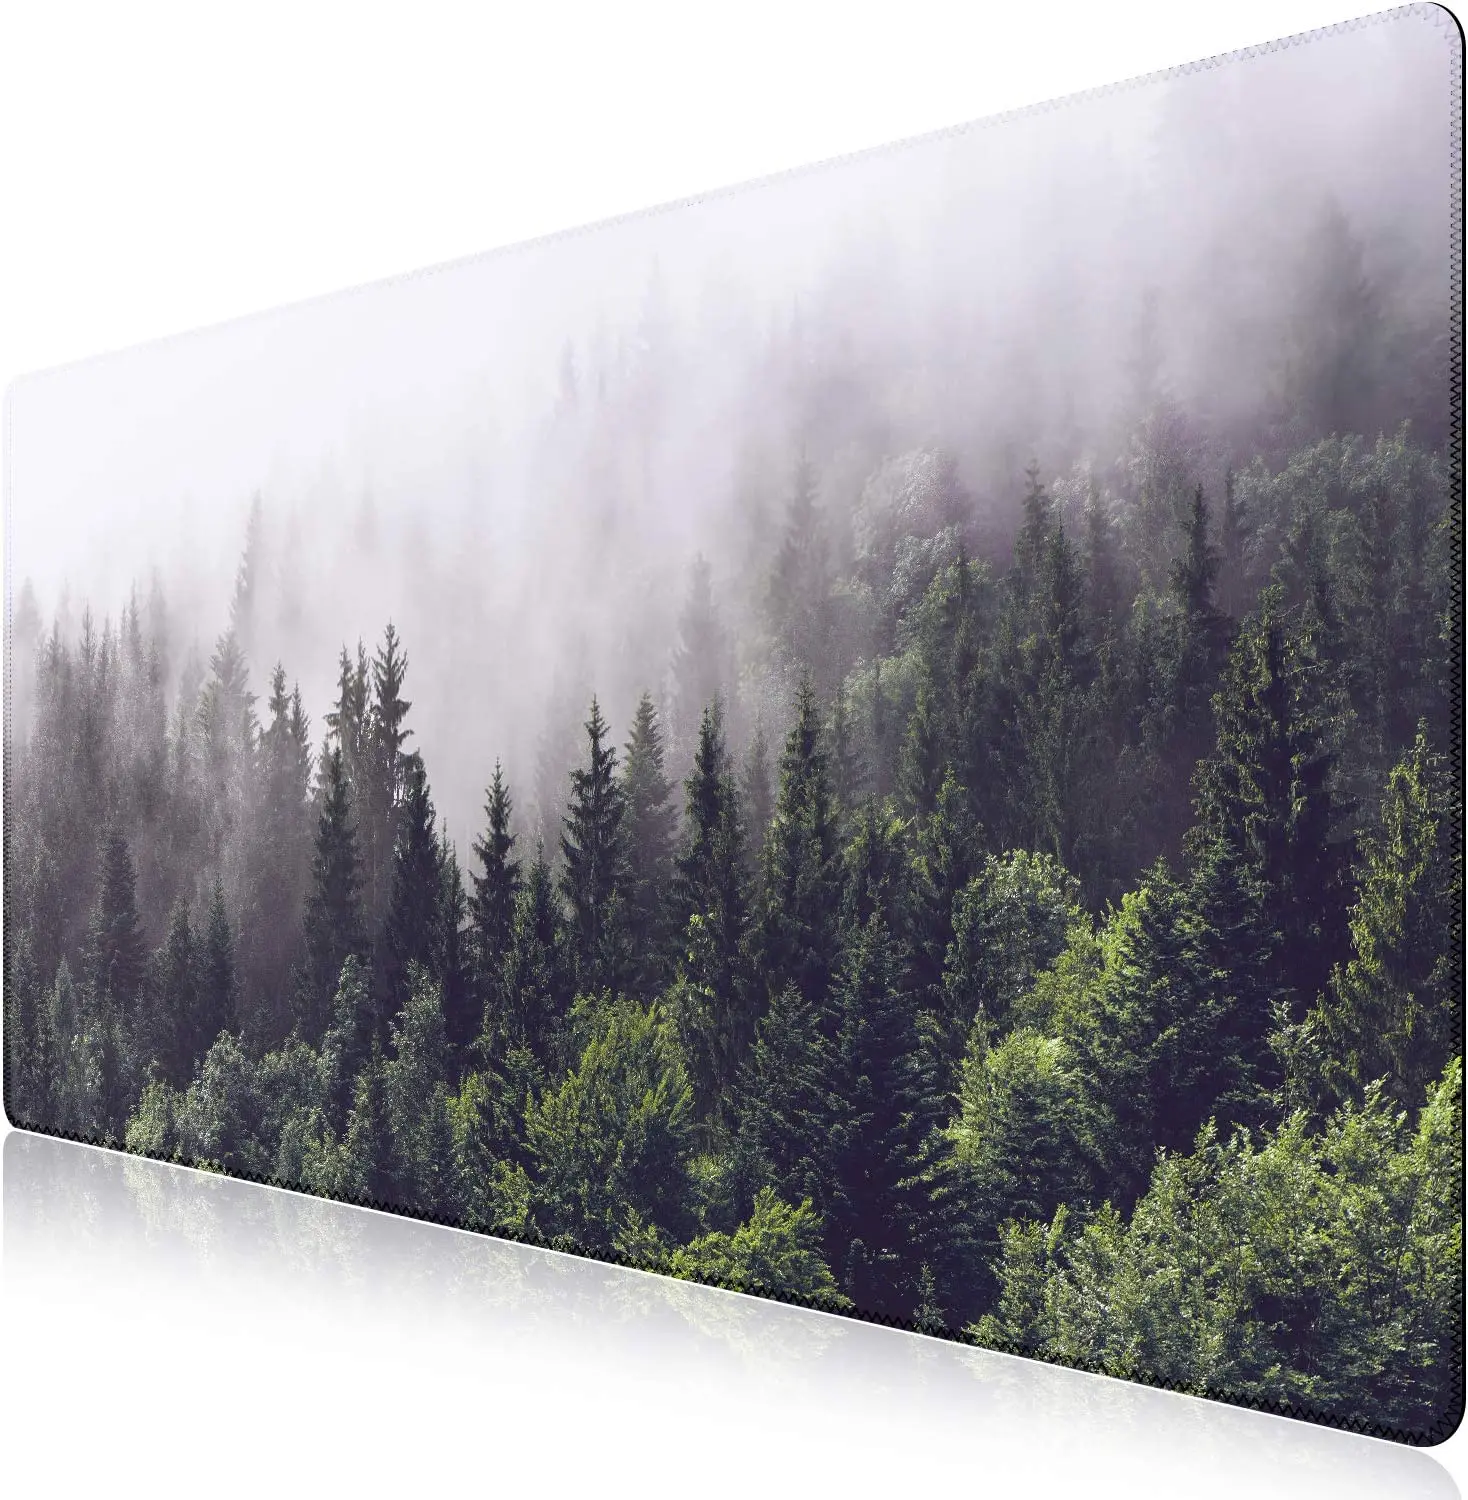 

Extended Mouse Pad 35.4x15.7 in Large 3mm Non-Slip Rubber Base Mousepad with Stitched Edges Waterproof Desk Pad- Forest